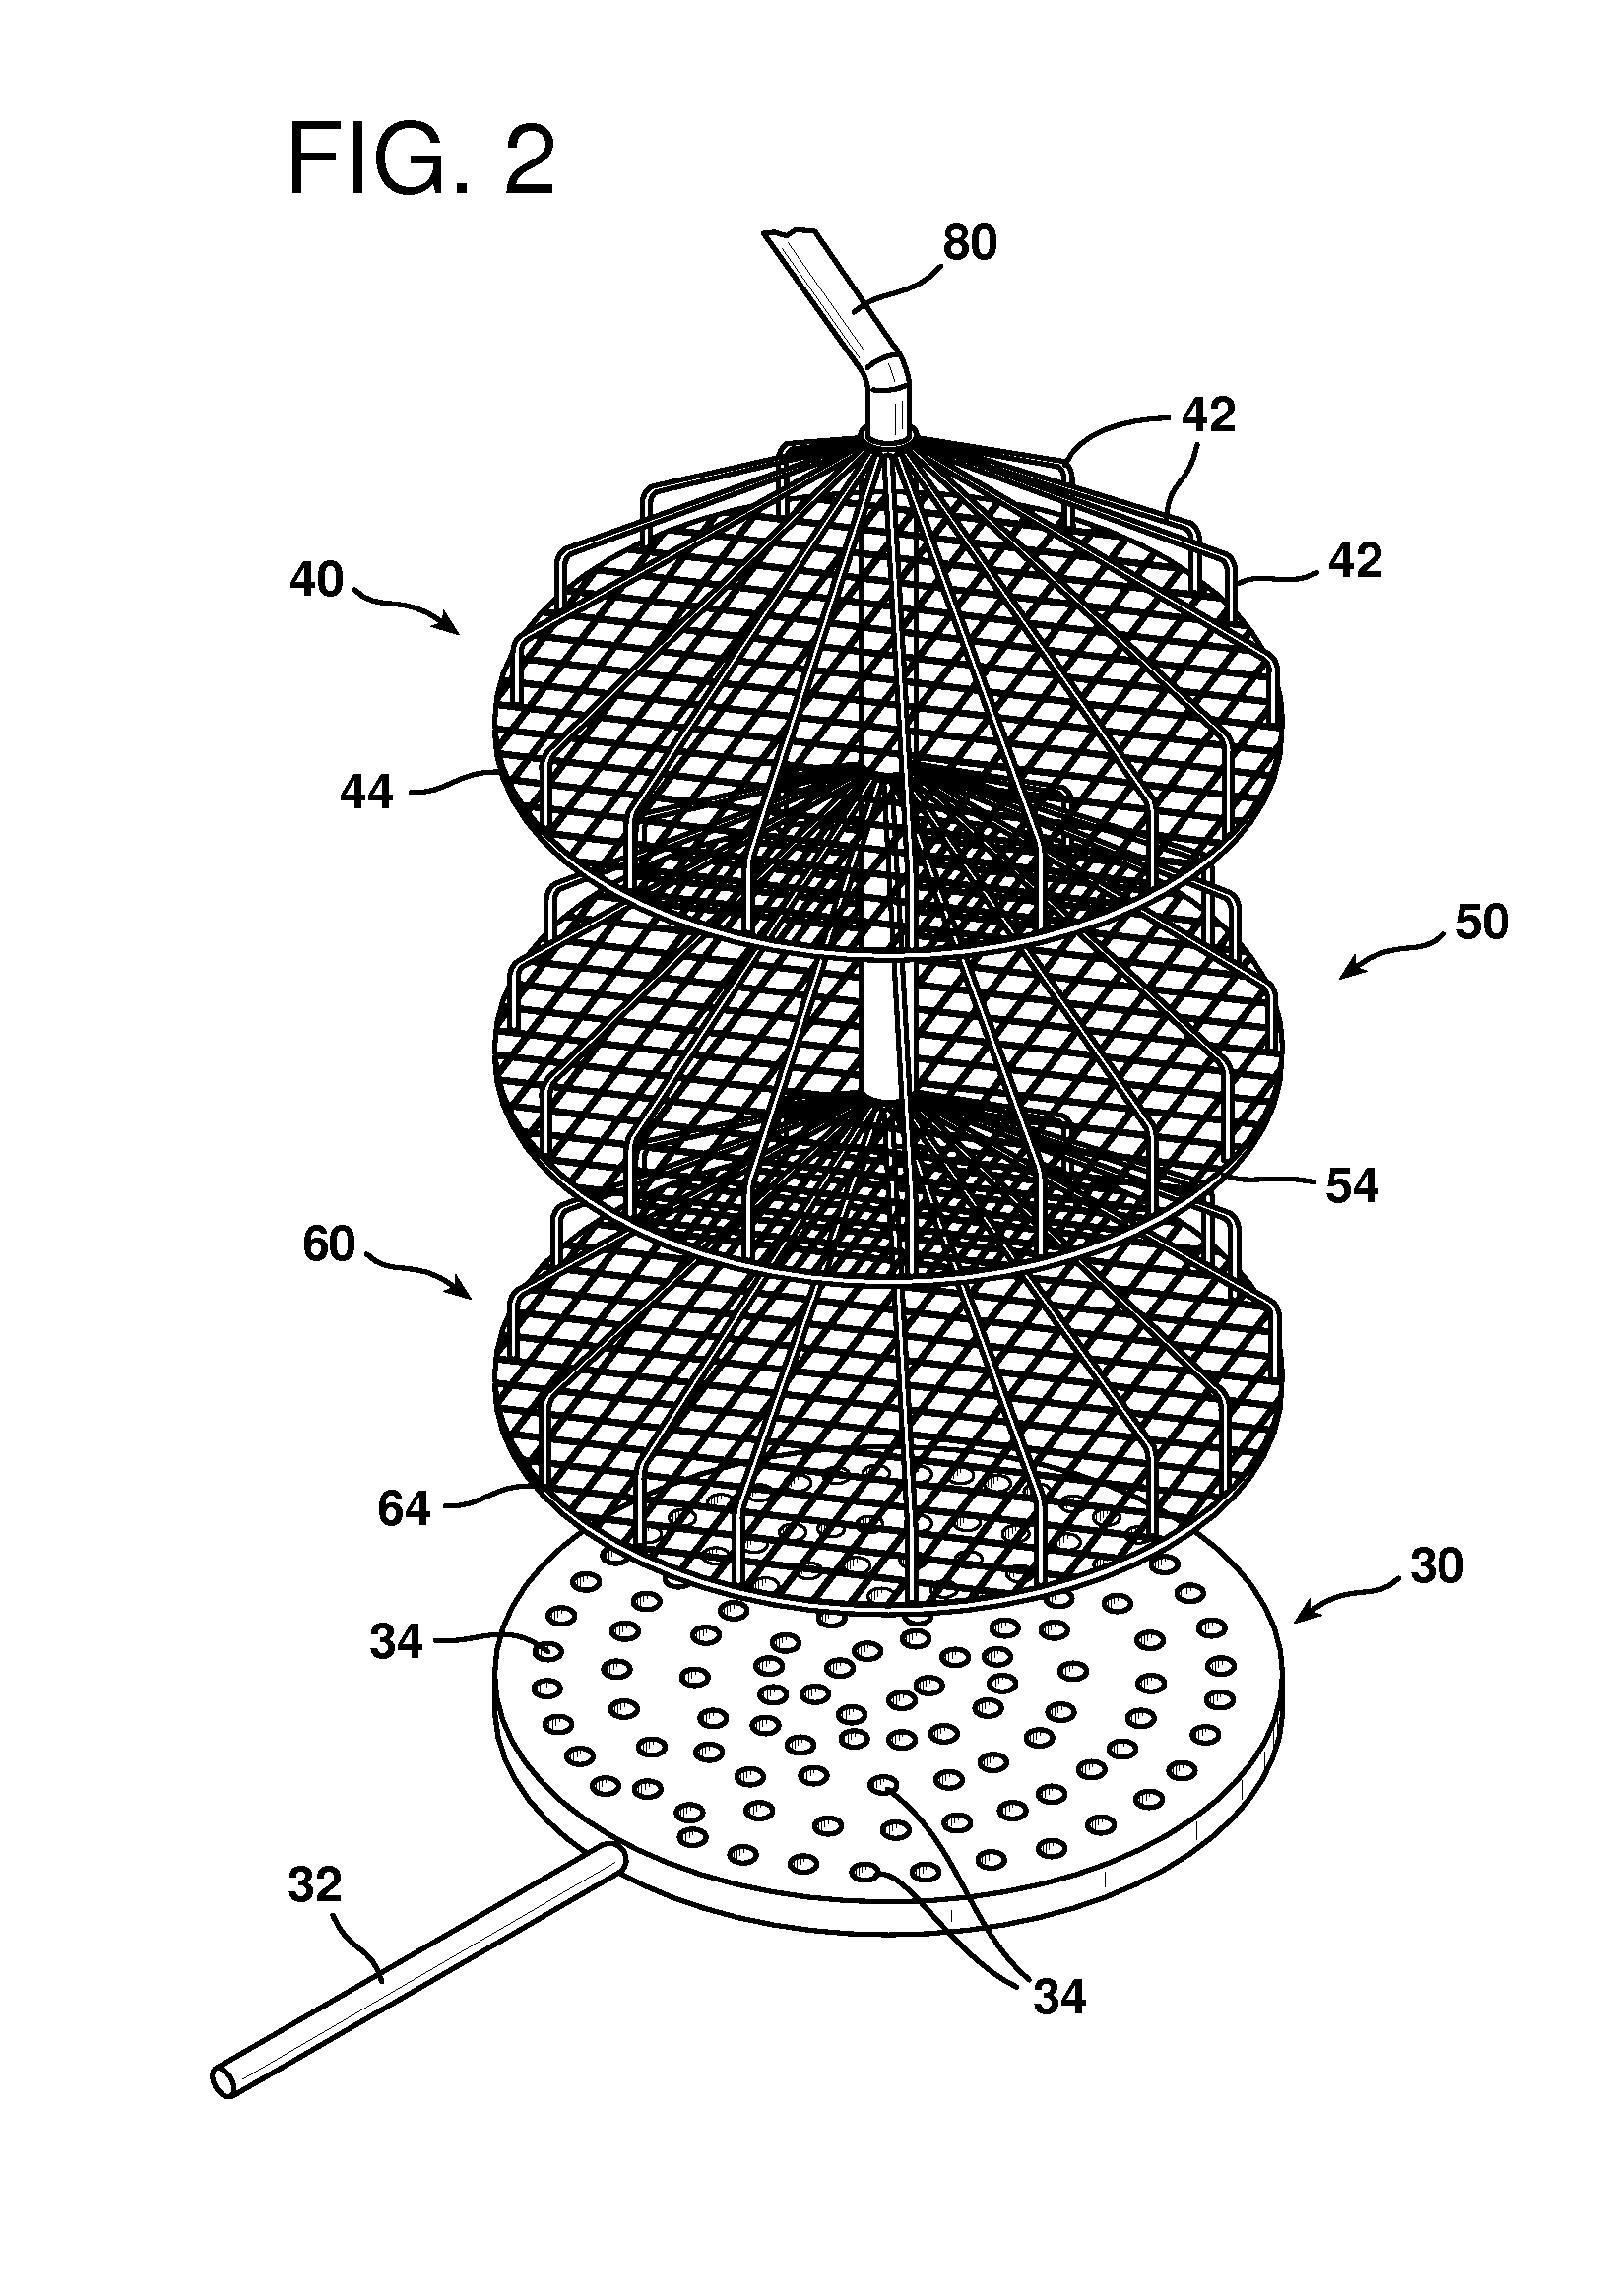 Apparatus and Method for Growing Biological Organisms for Fuel and Other Purposes